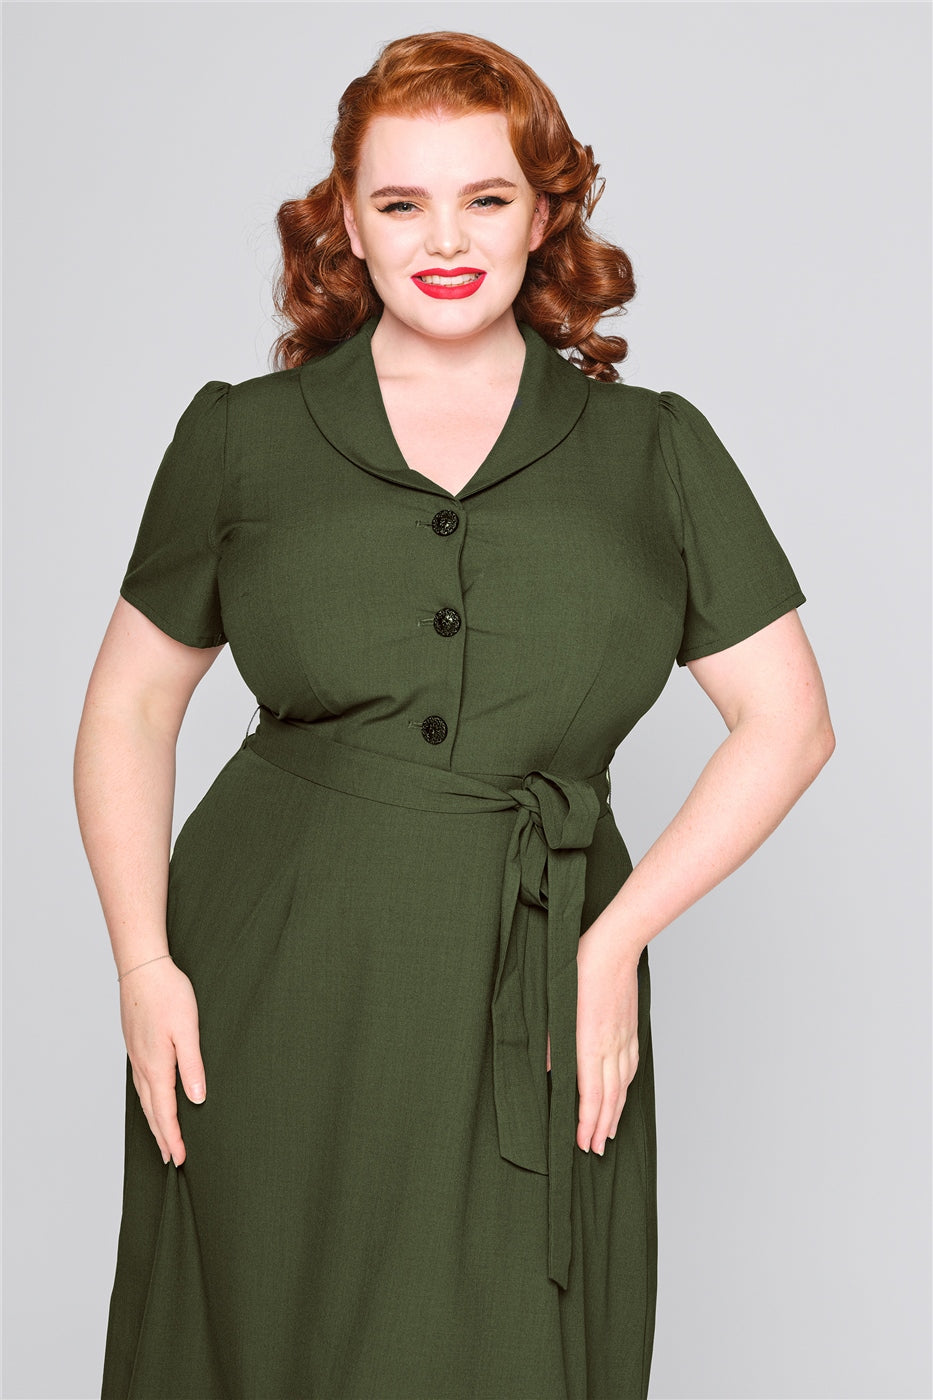 Red haired woman with a radiant smile wearing a green shirt style dress